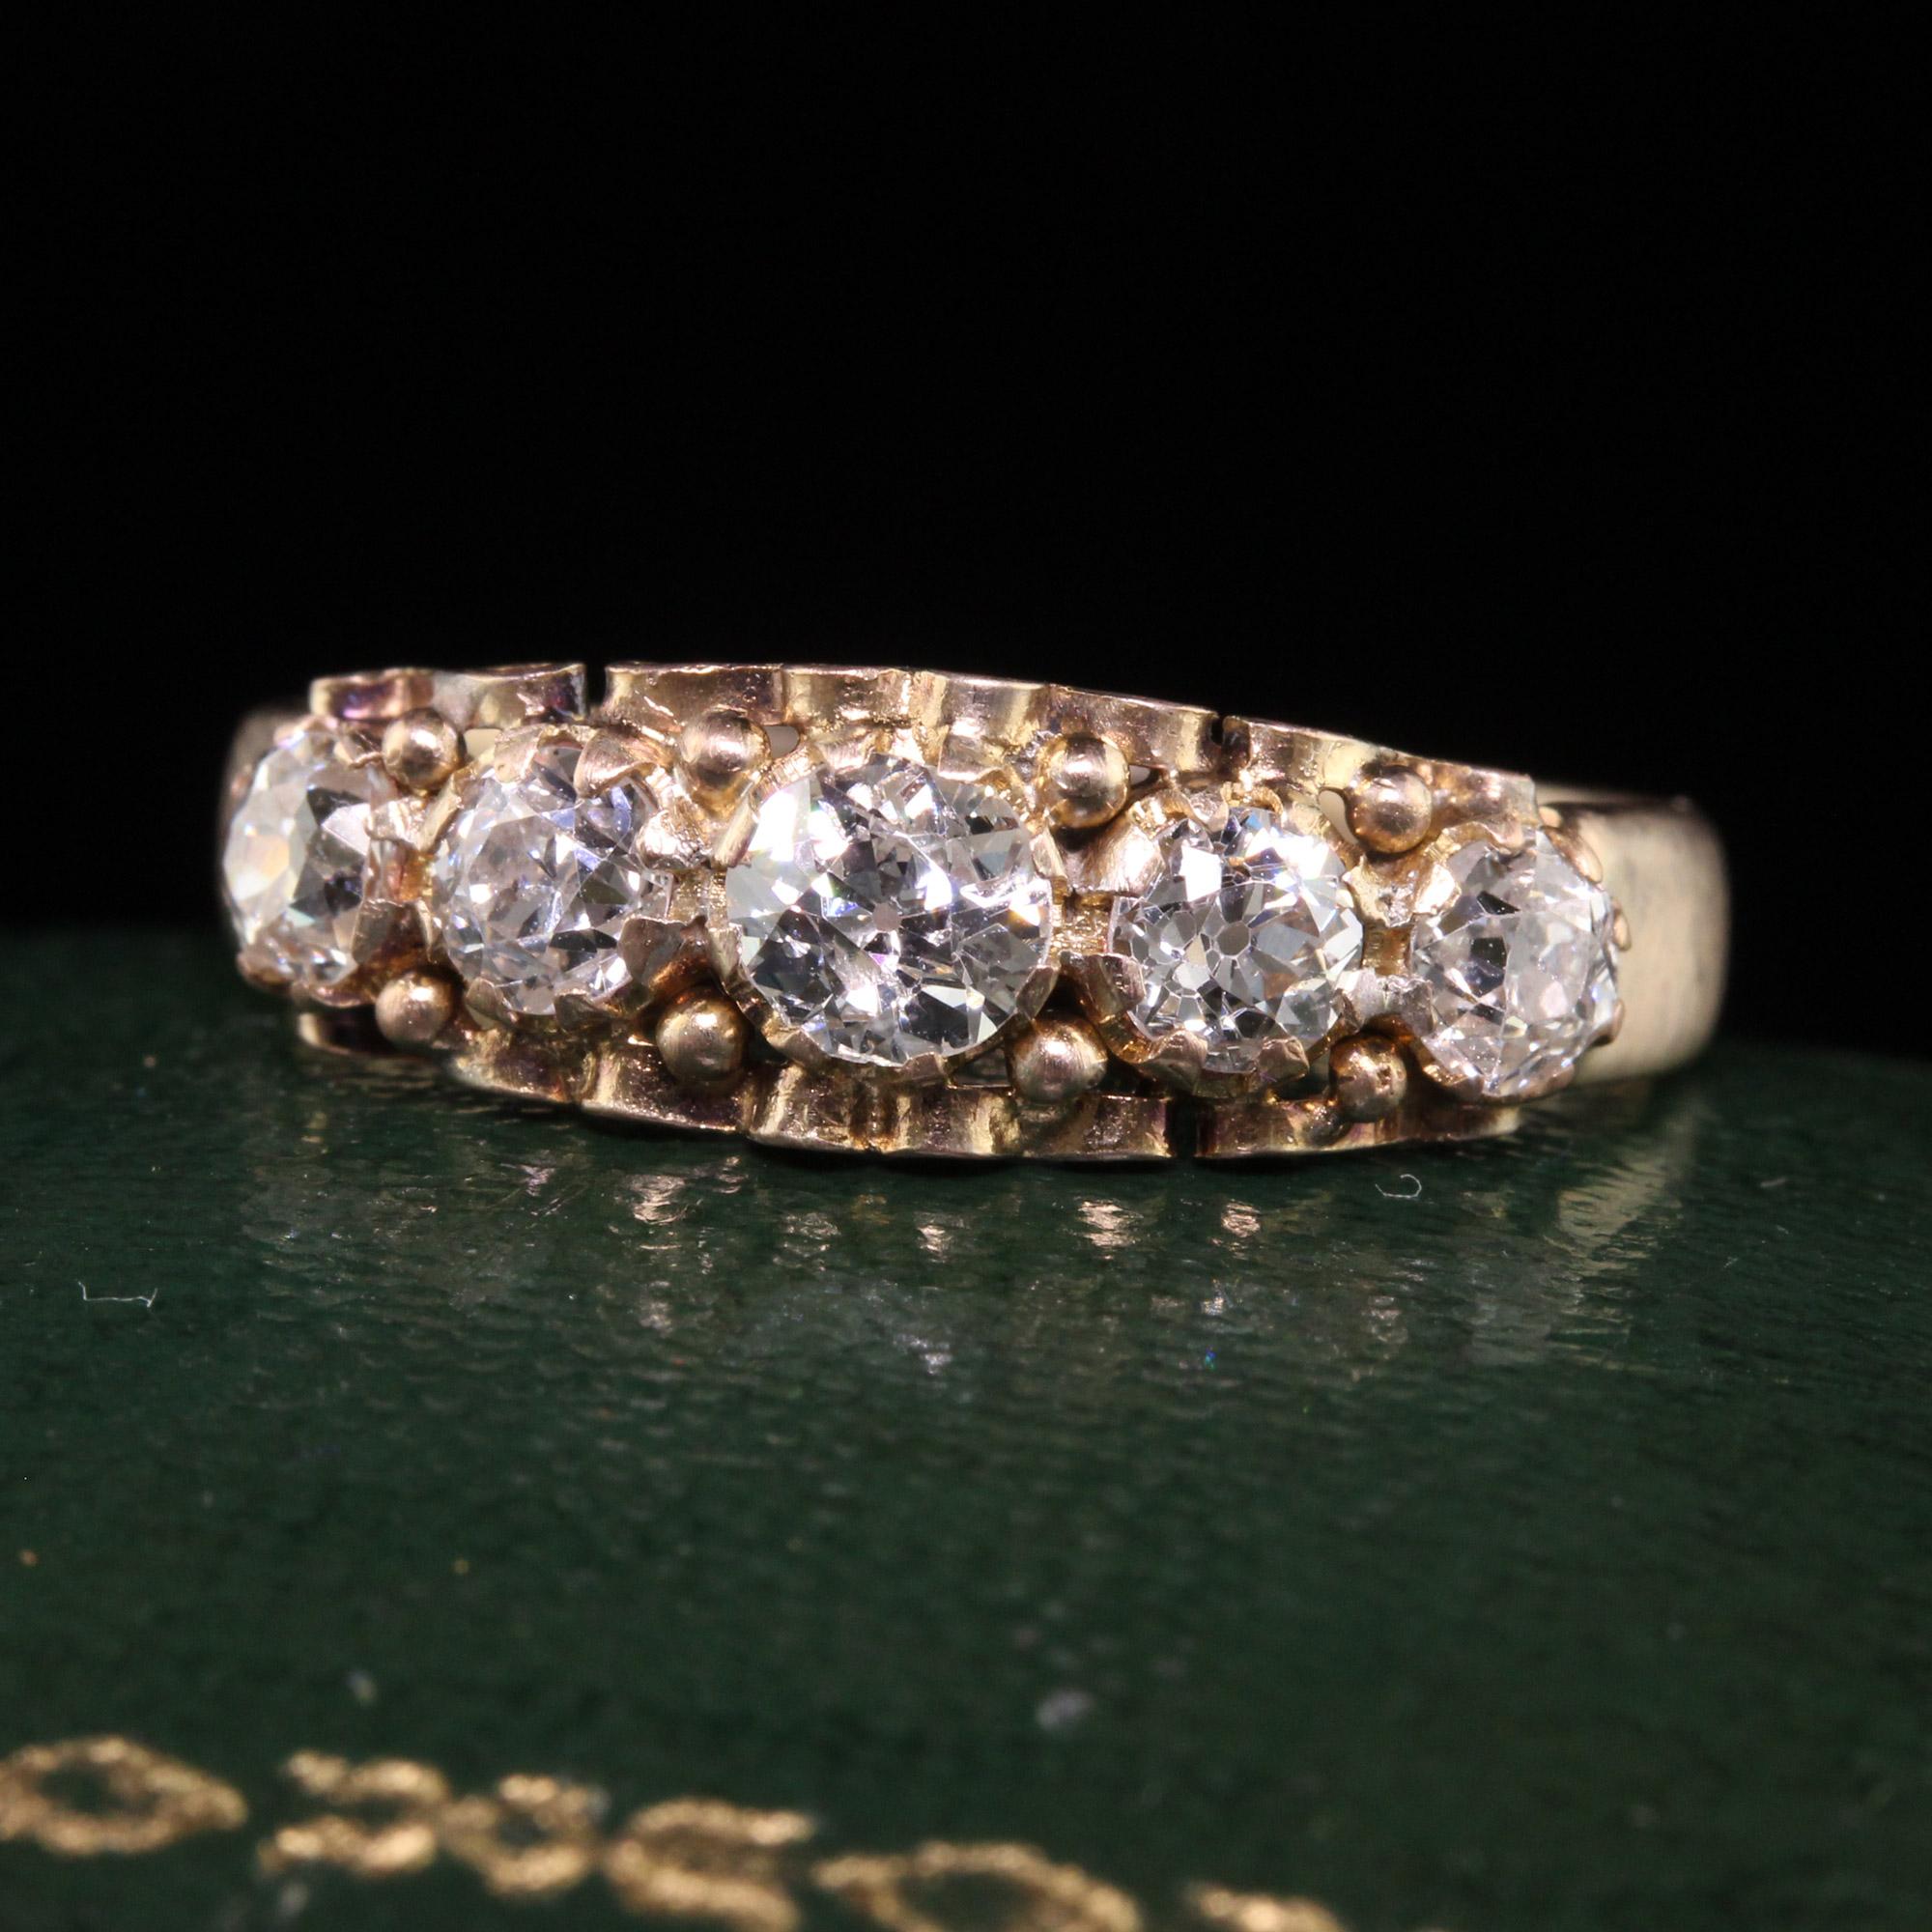 Beautiful Antique Victorian 15K Yellow Gold Old European Cut Diamond Five Stone Band. This beautiful band is crafted in 15k yellow gold. The ring features five old european cut diamonds set in a gorgeous Victorian 15k mounting. It has a low profile